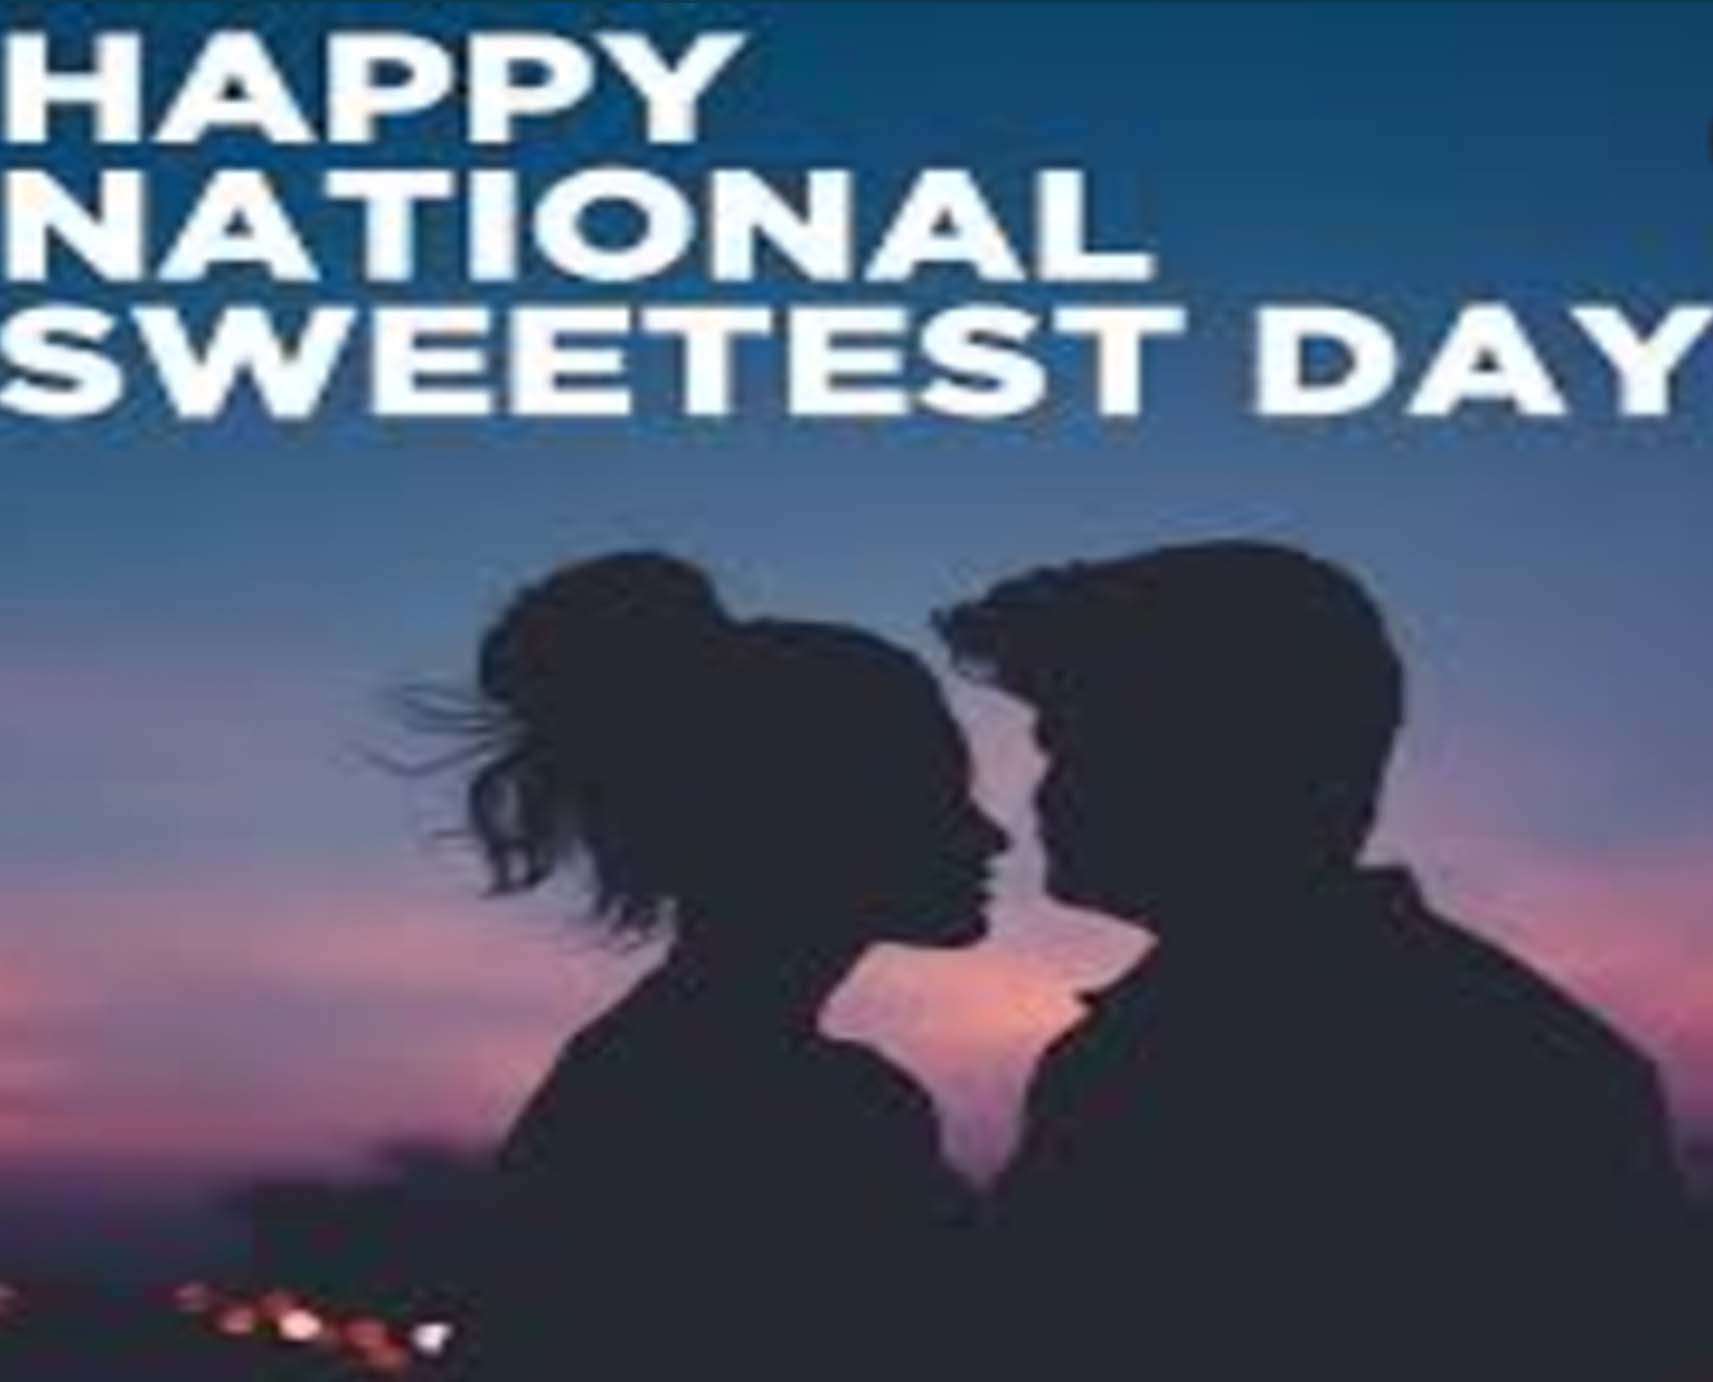 National Sweetest Day